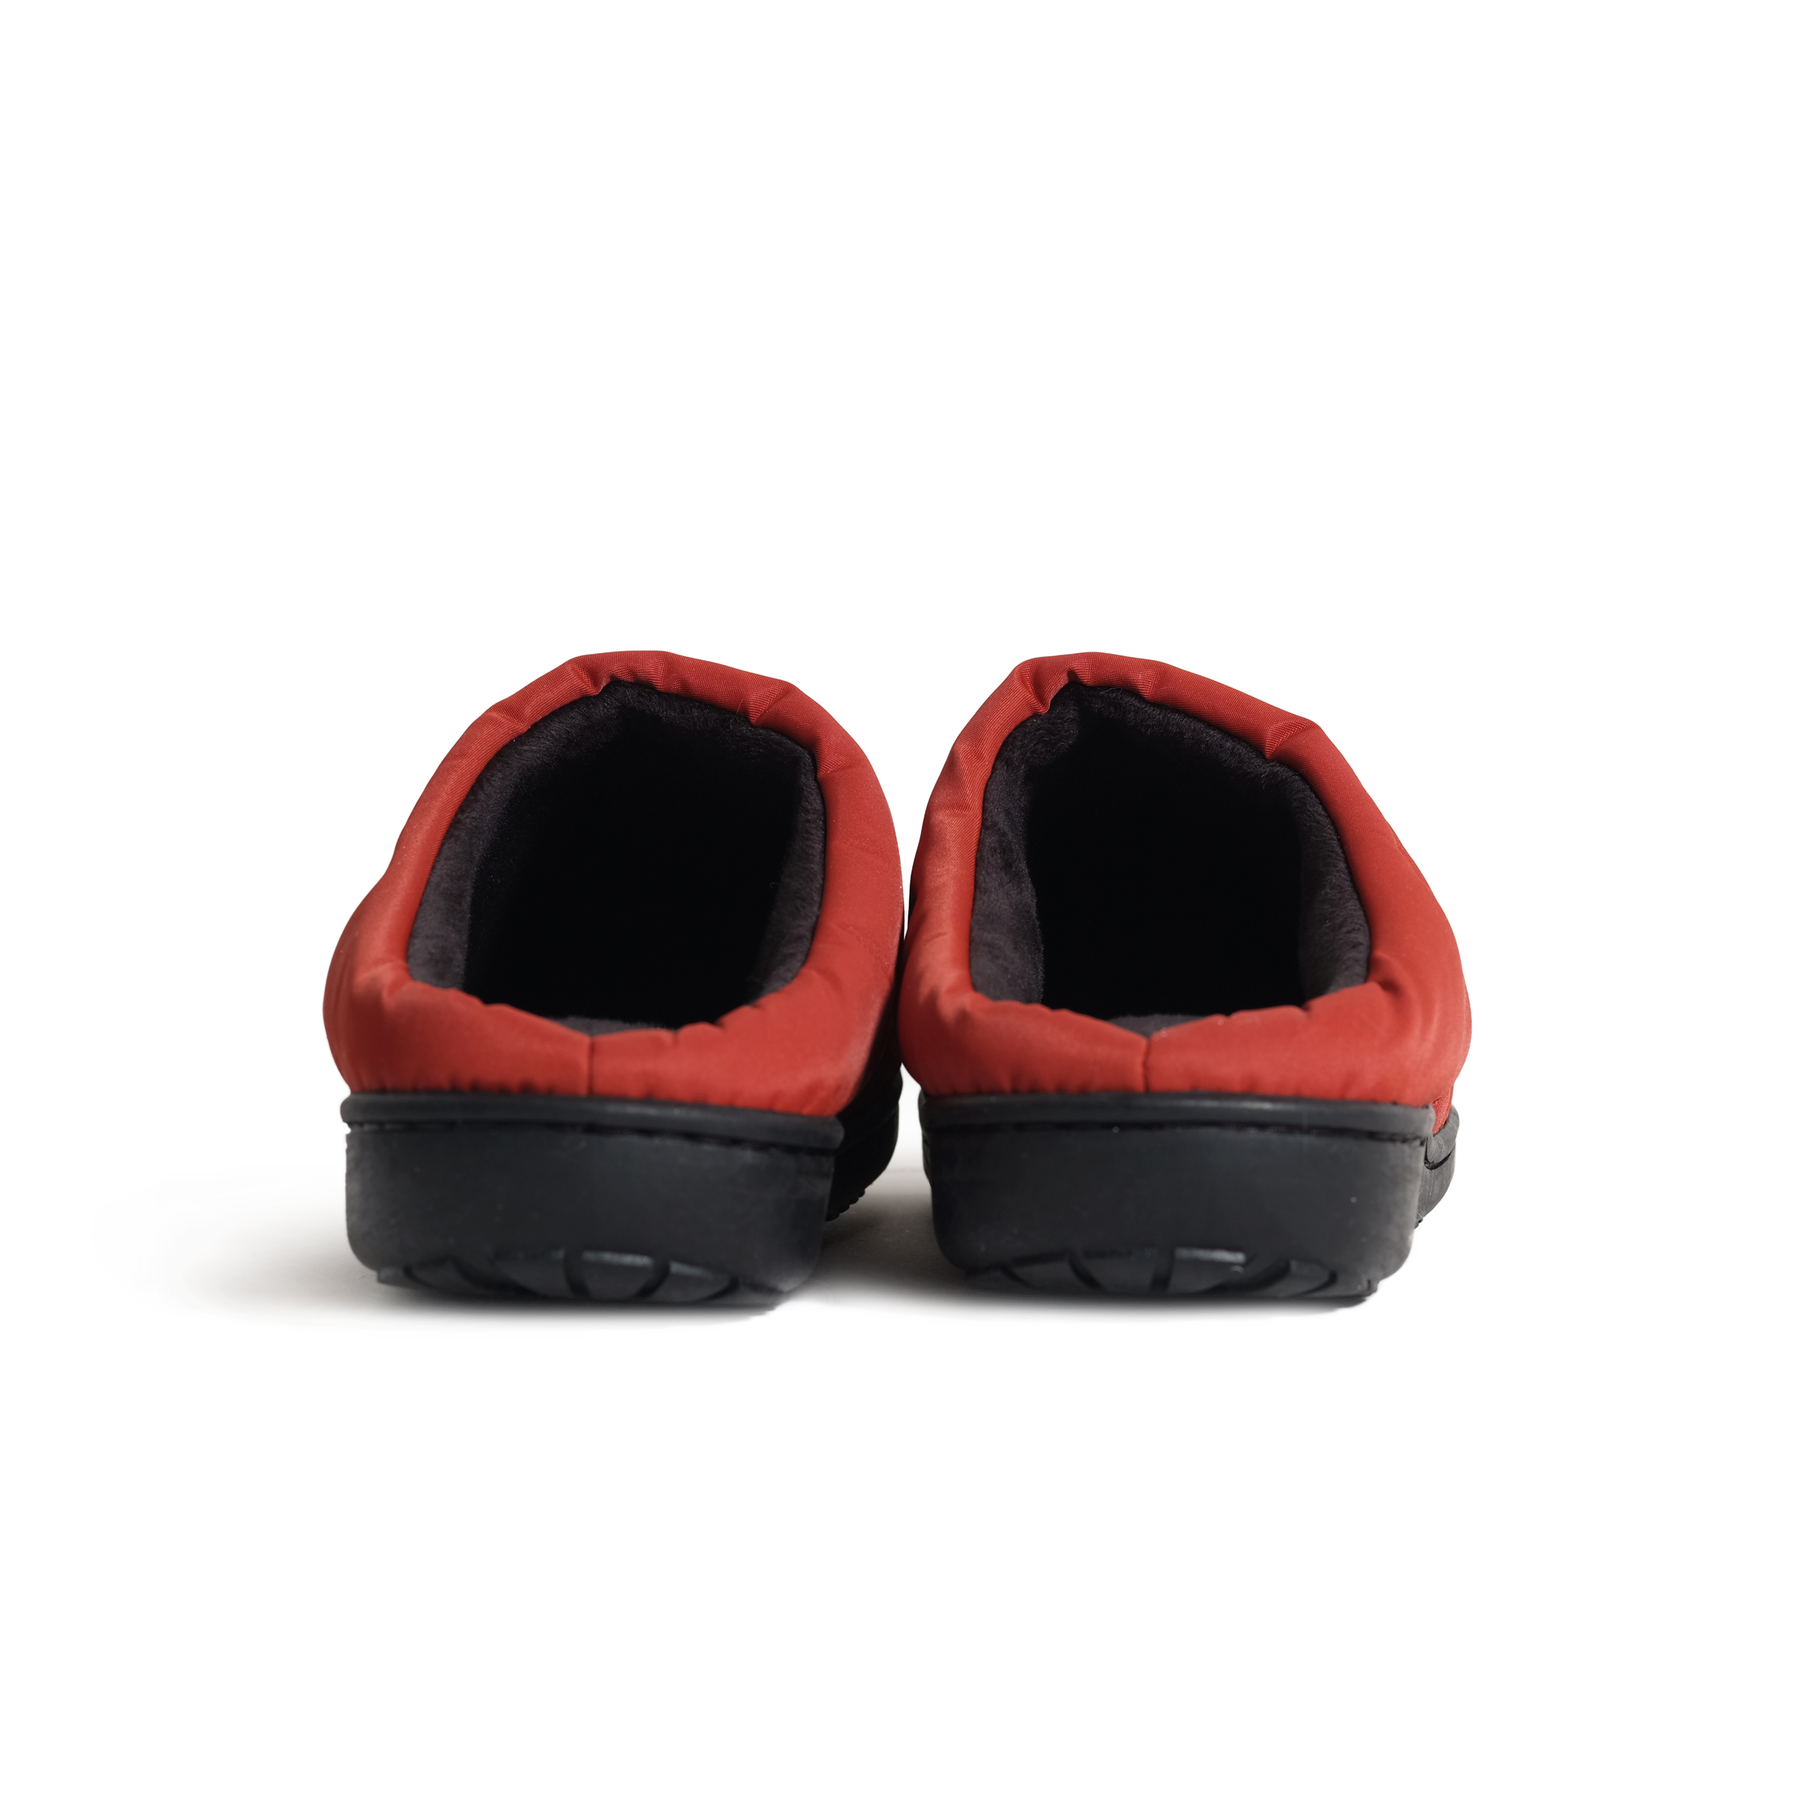 AMEICO - Official US Distributor of SUBU - Nannen Outdoor Slippers 